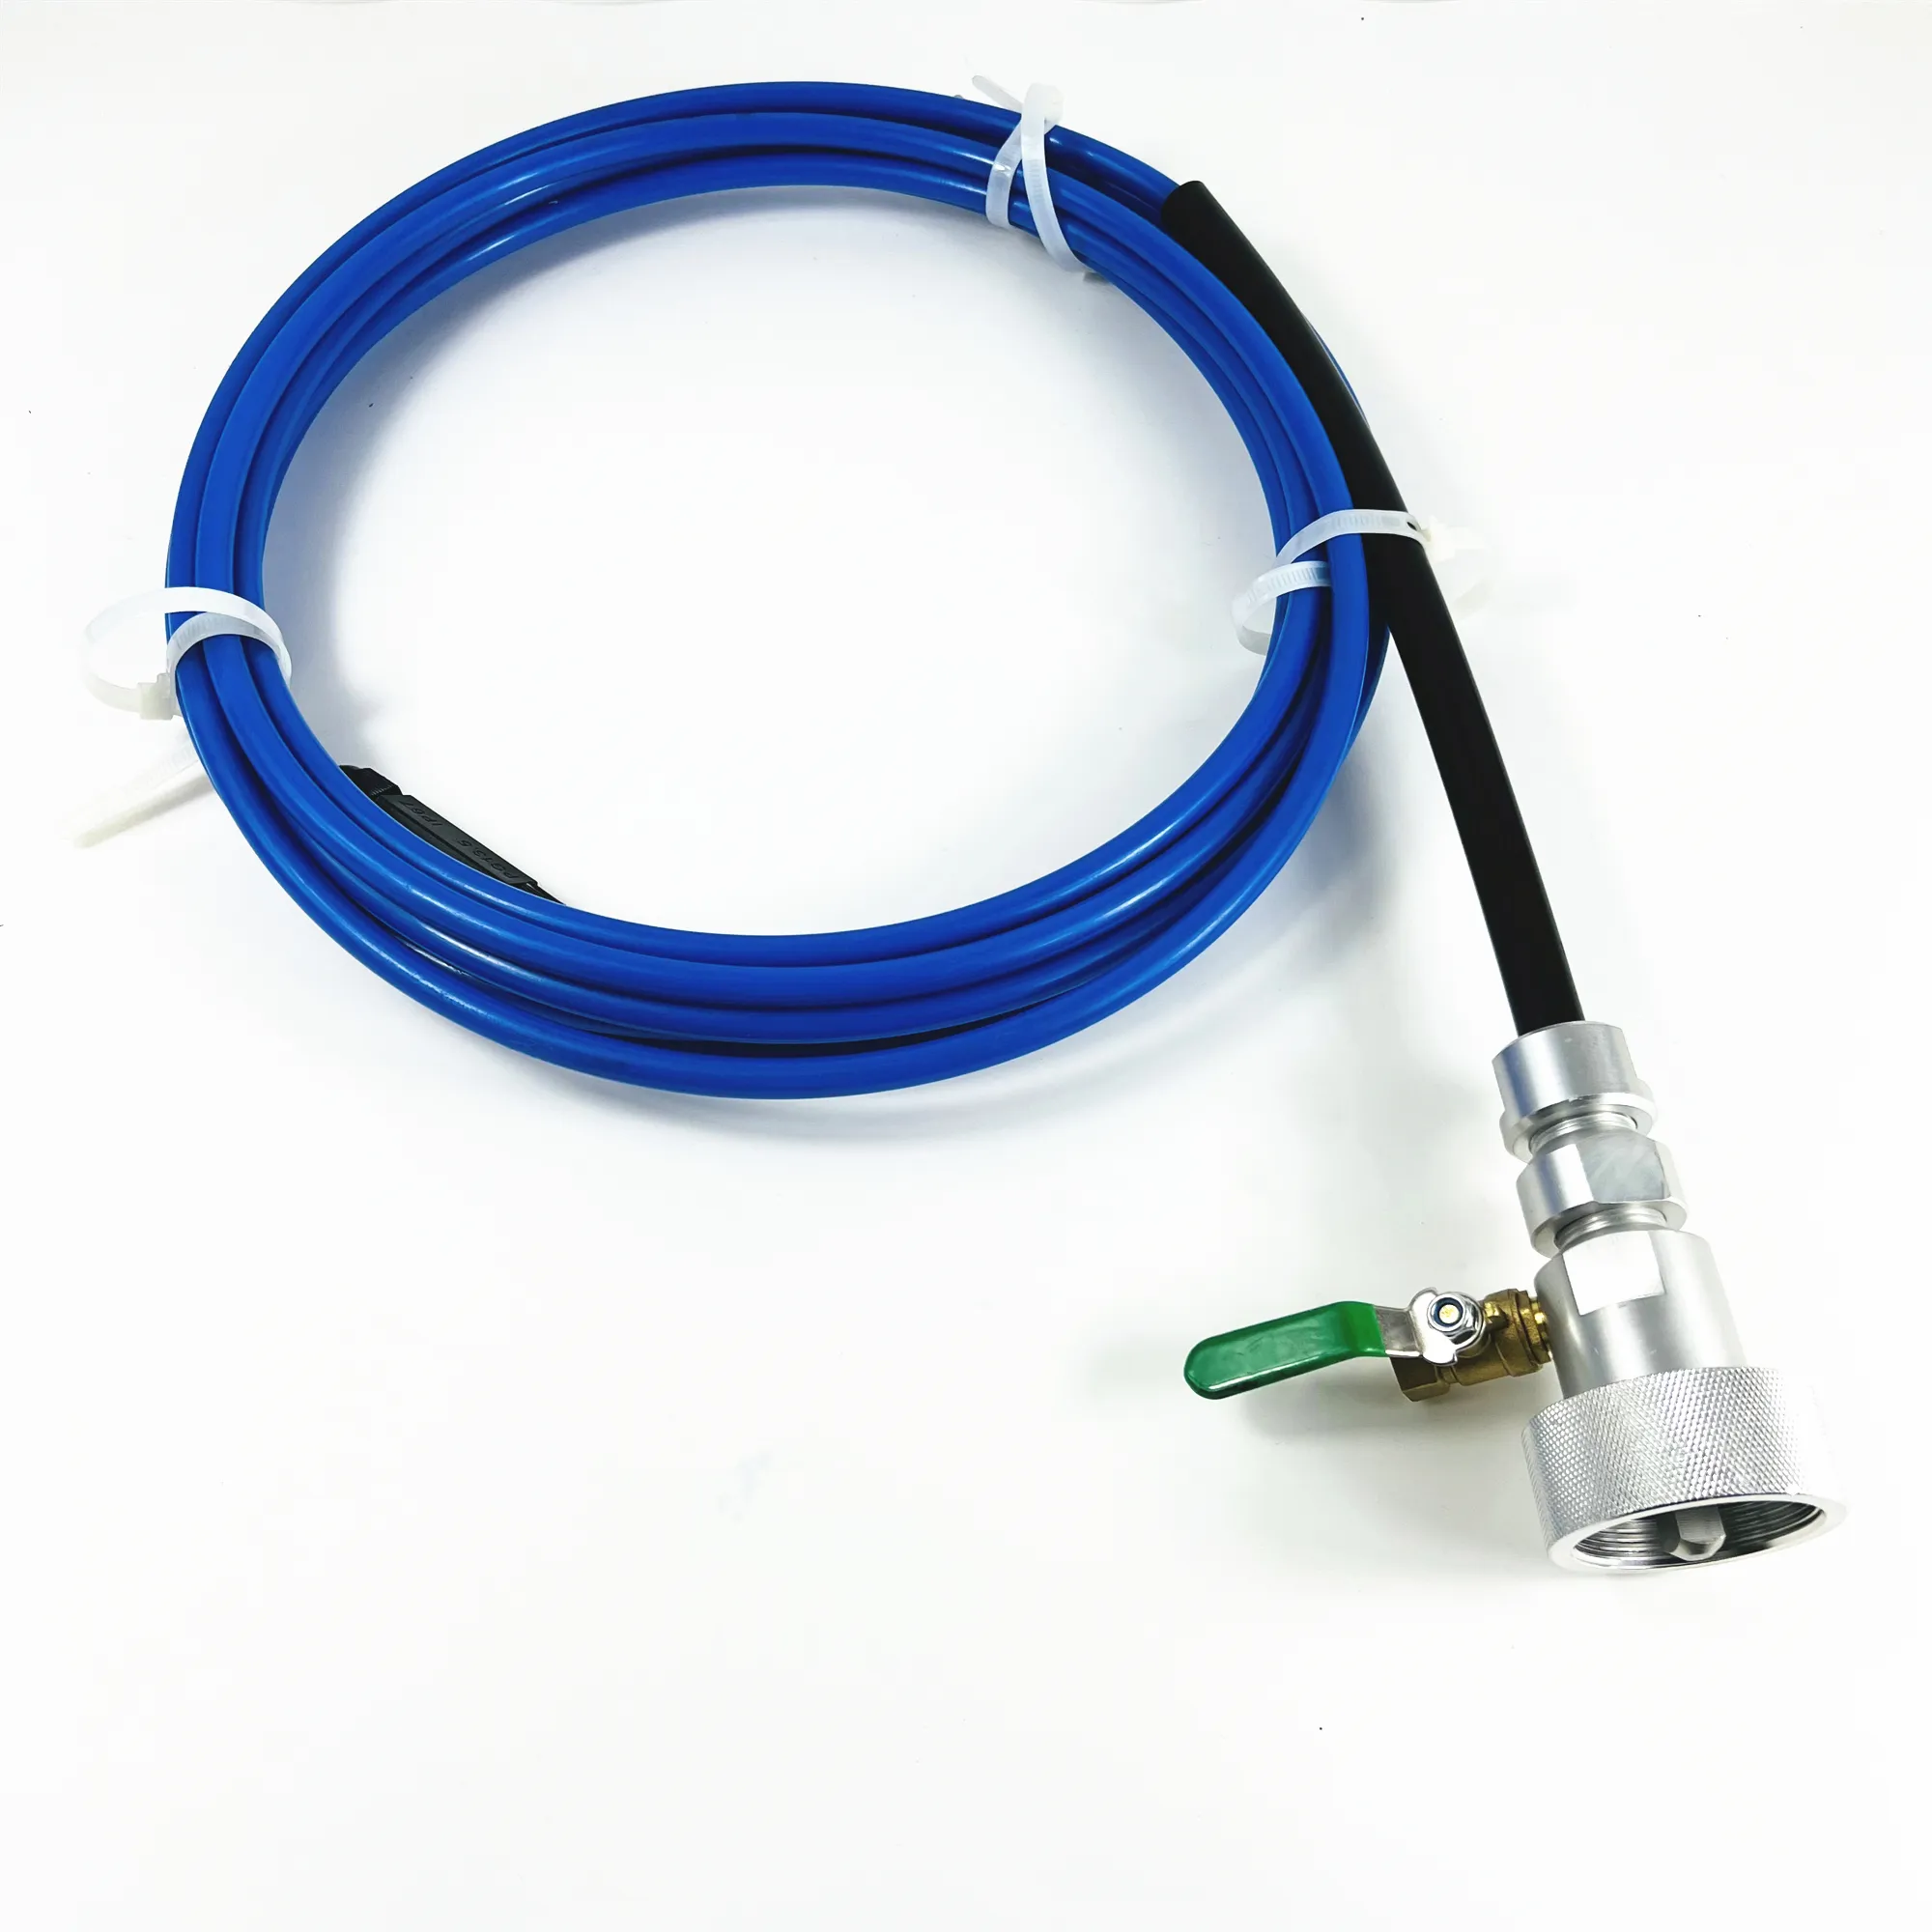 TDF 1/2 Inch 12mm Flexible Shaft For Tube Cleaner Cleaning Equipment Can Work With Power Drill